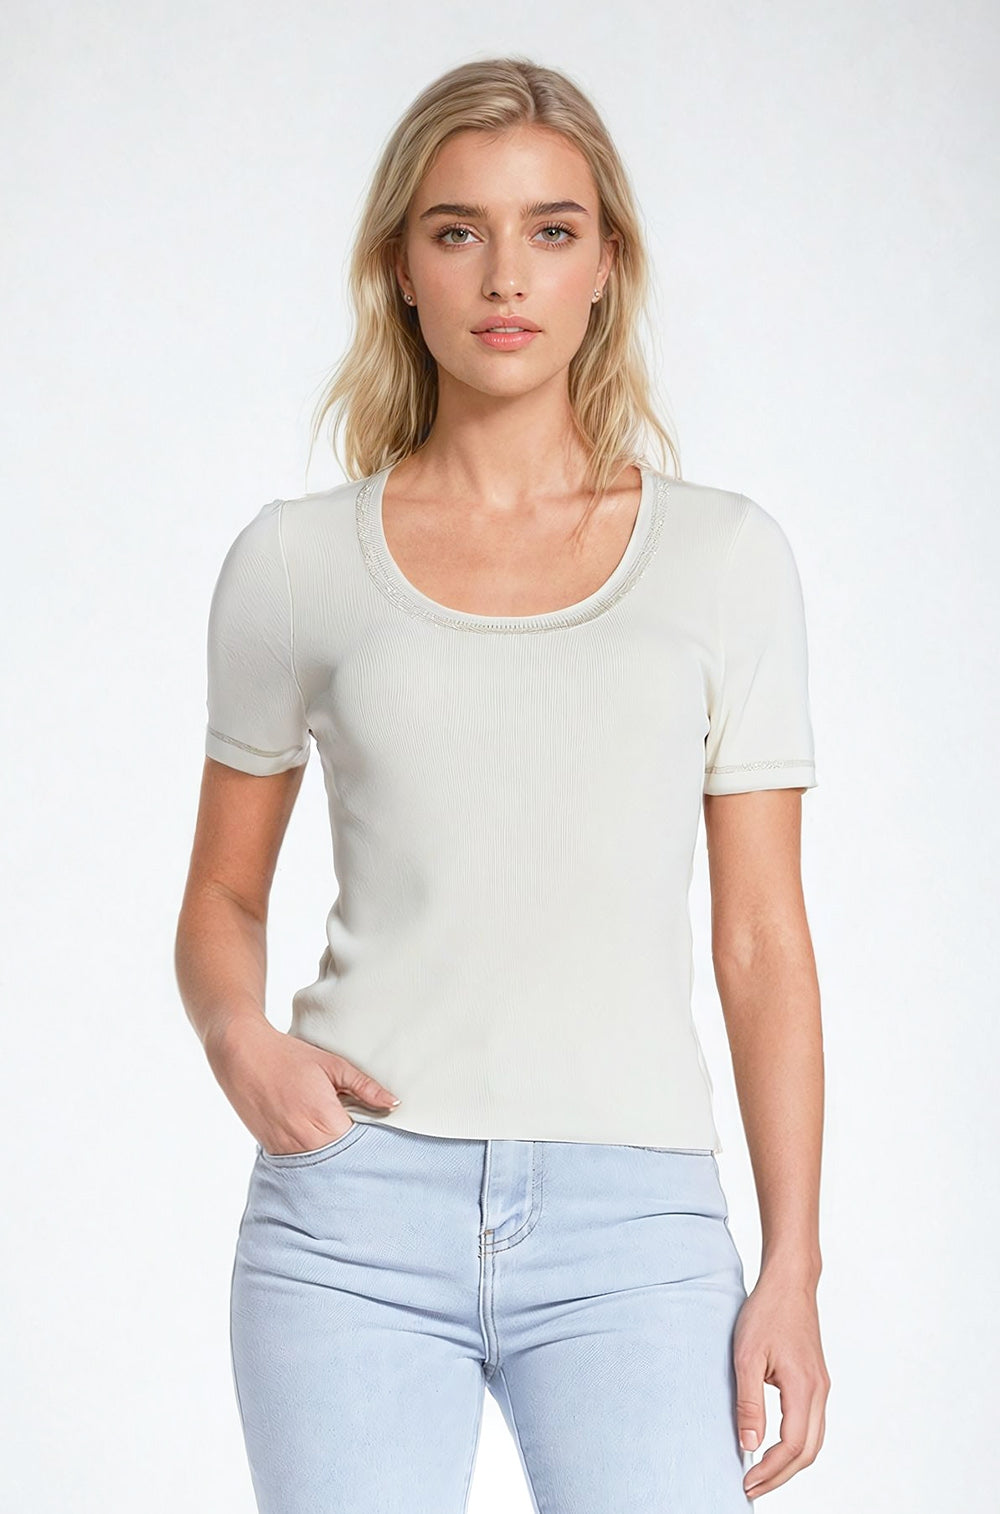 Q2 Short Sleeve sweater In beige With Silver Seam at Round Neck